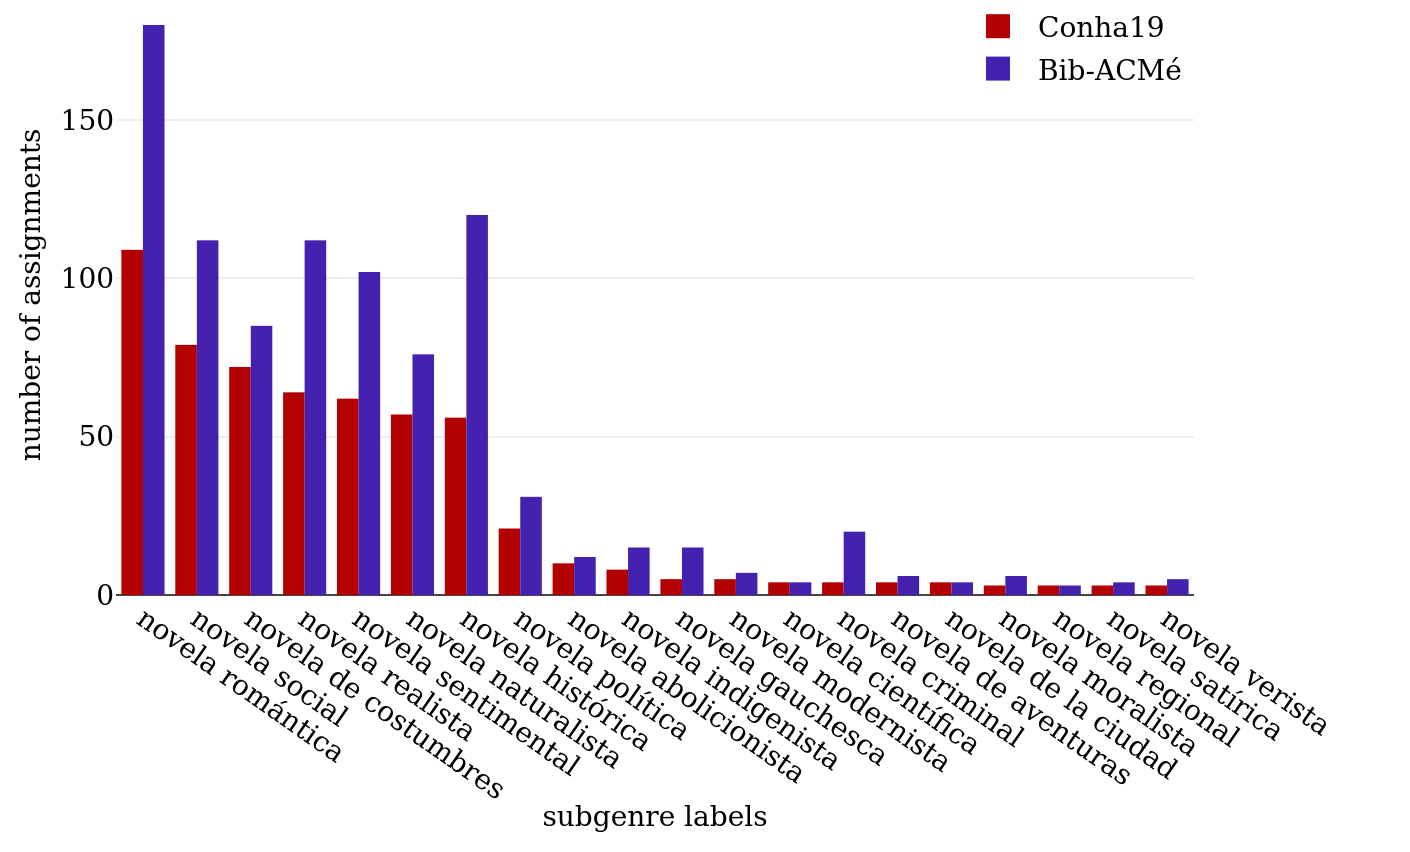 Top 20 most frequent literary historical subgenre labels in the
                     corpus.